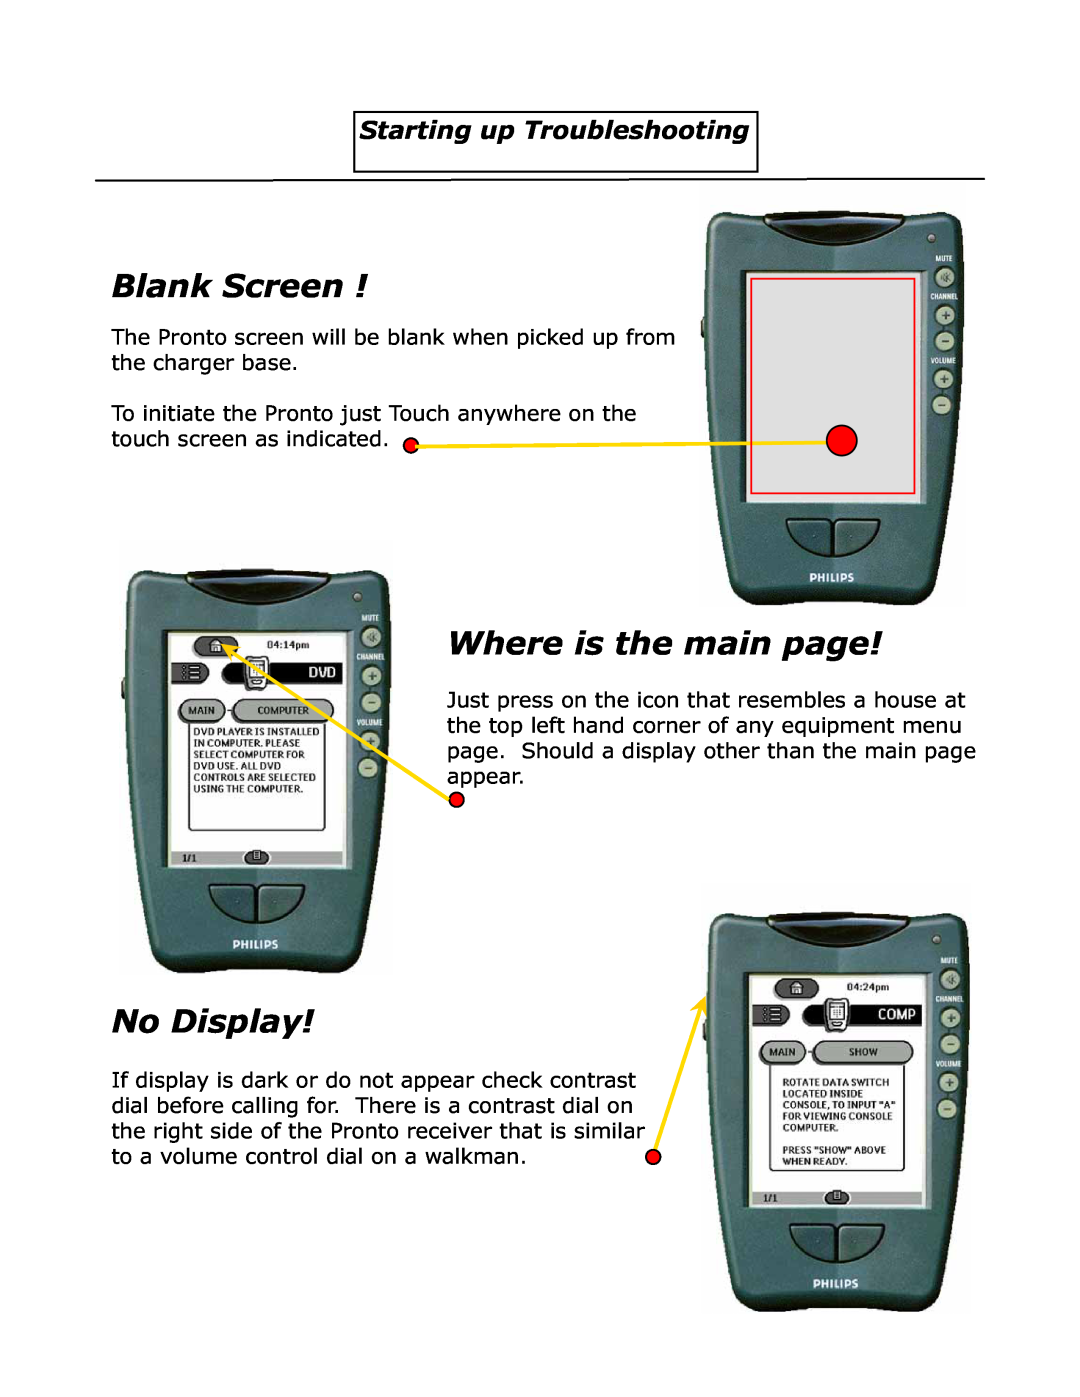 Philips Head Hall C13 manual Starting up Troubleshooting, Blank Screen, Where is the main page, No Display 